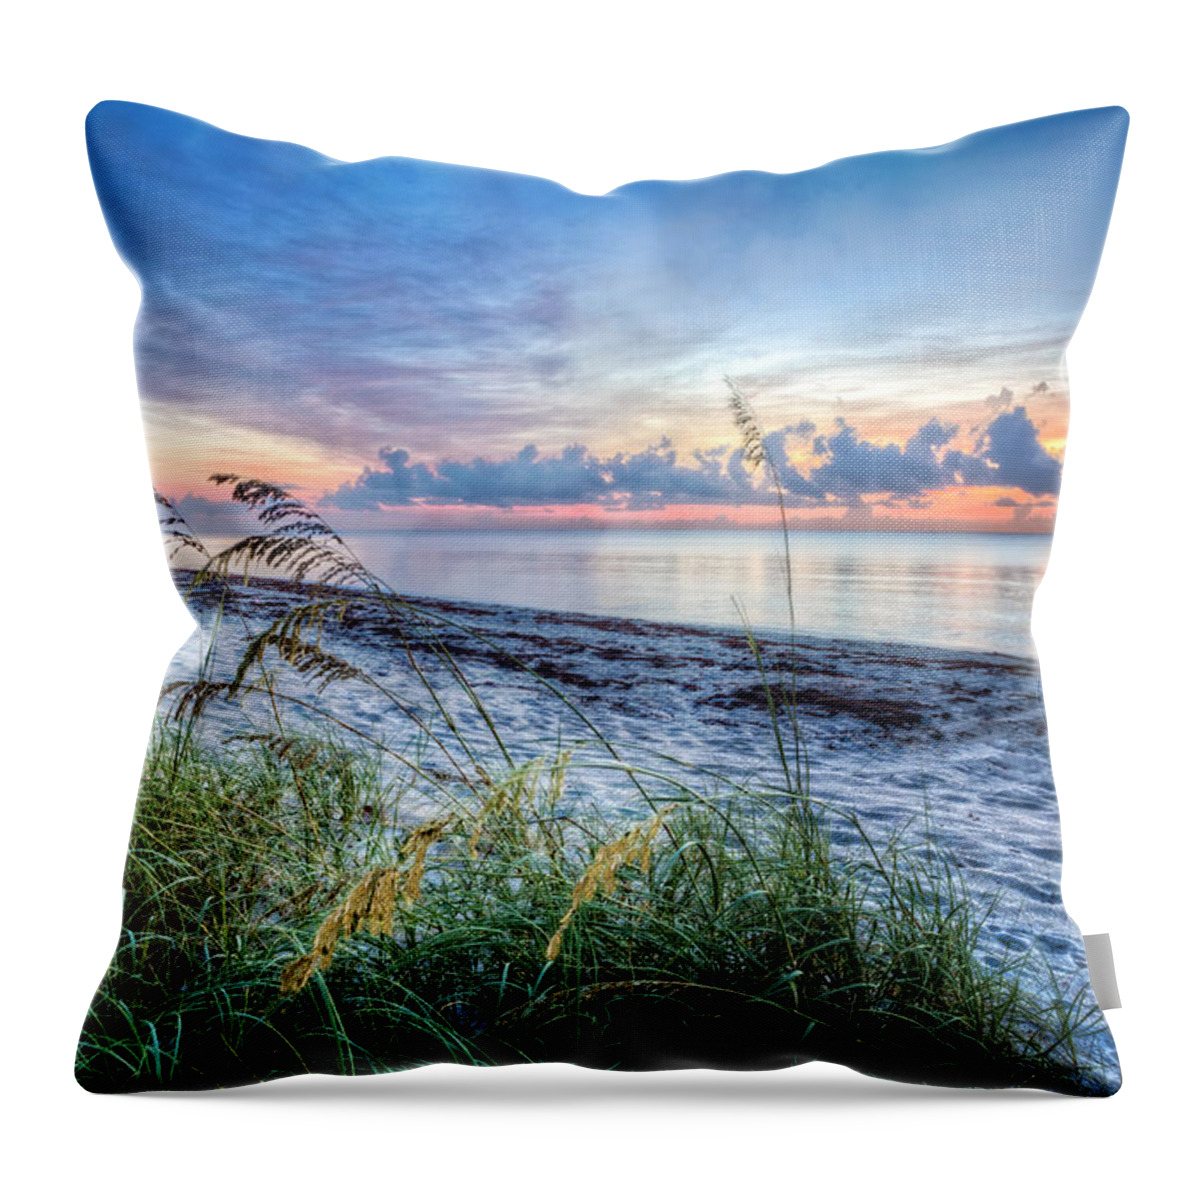 Clouds Throw Pillow featuring the photograph Peaceful Seas by Debra and Dave Vanderlaan